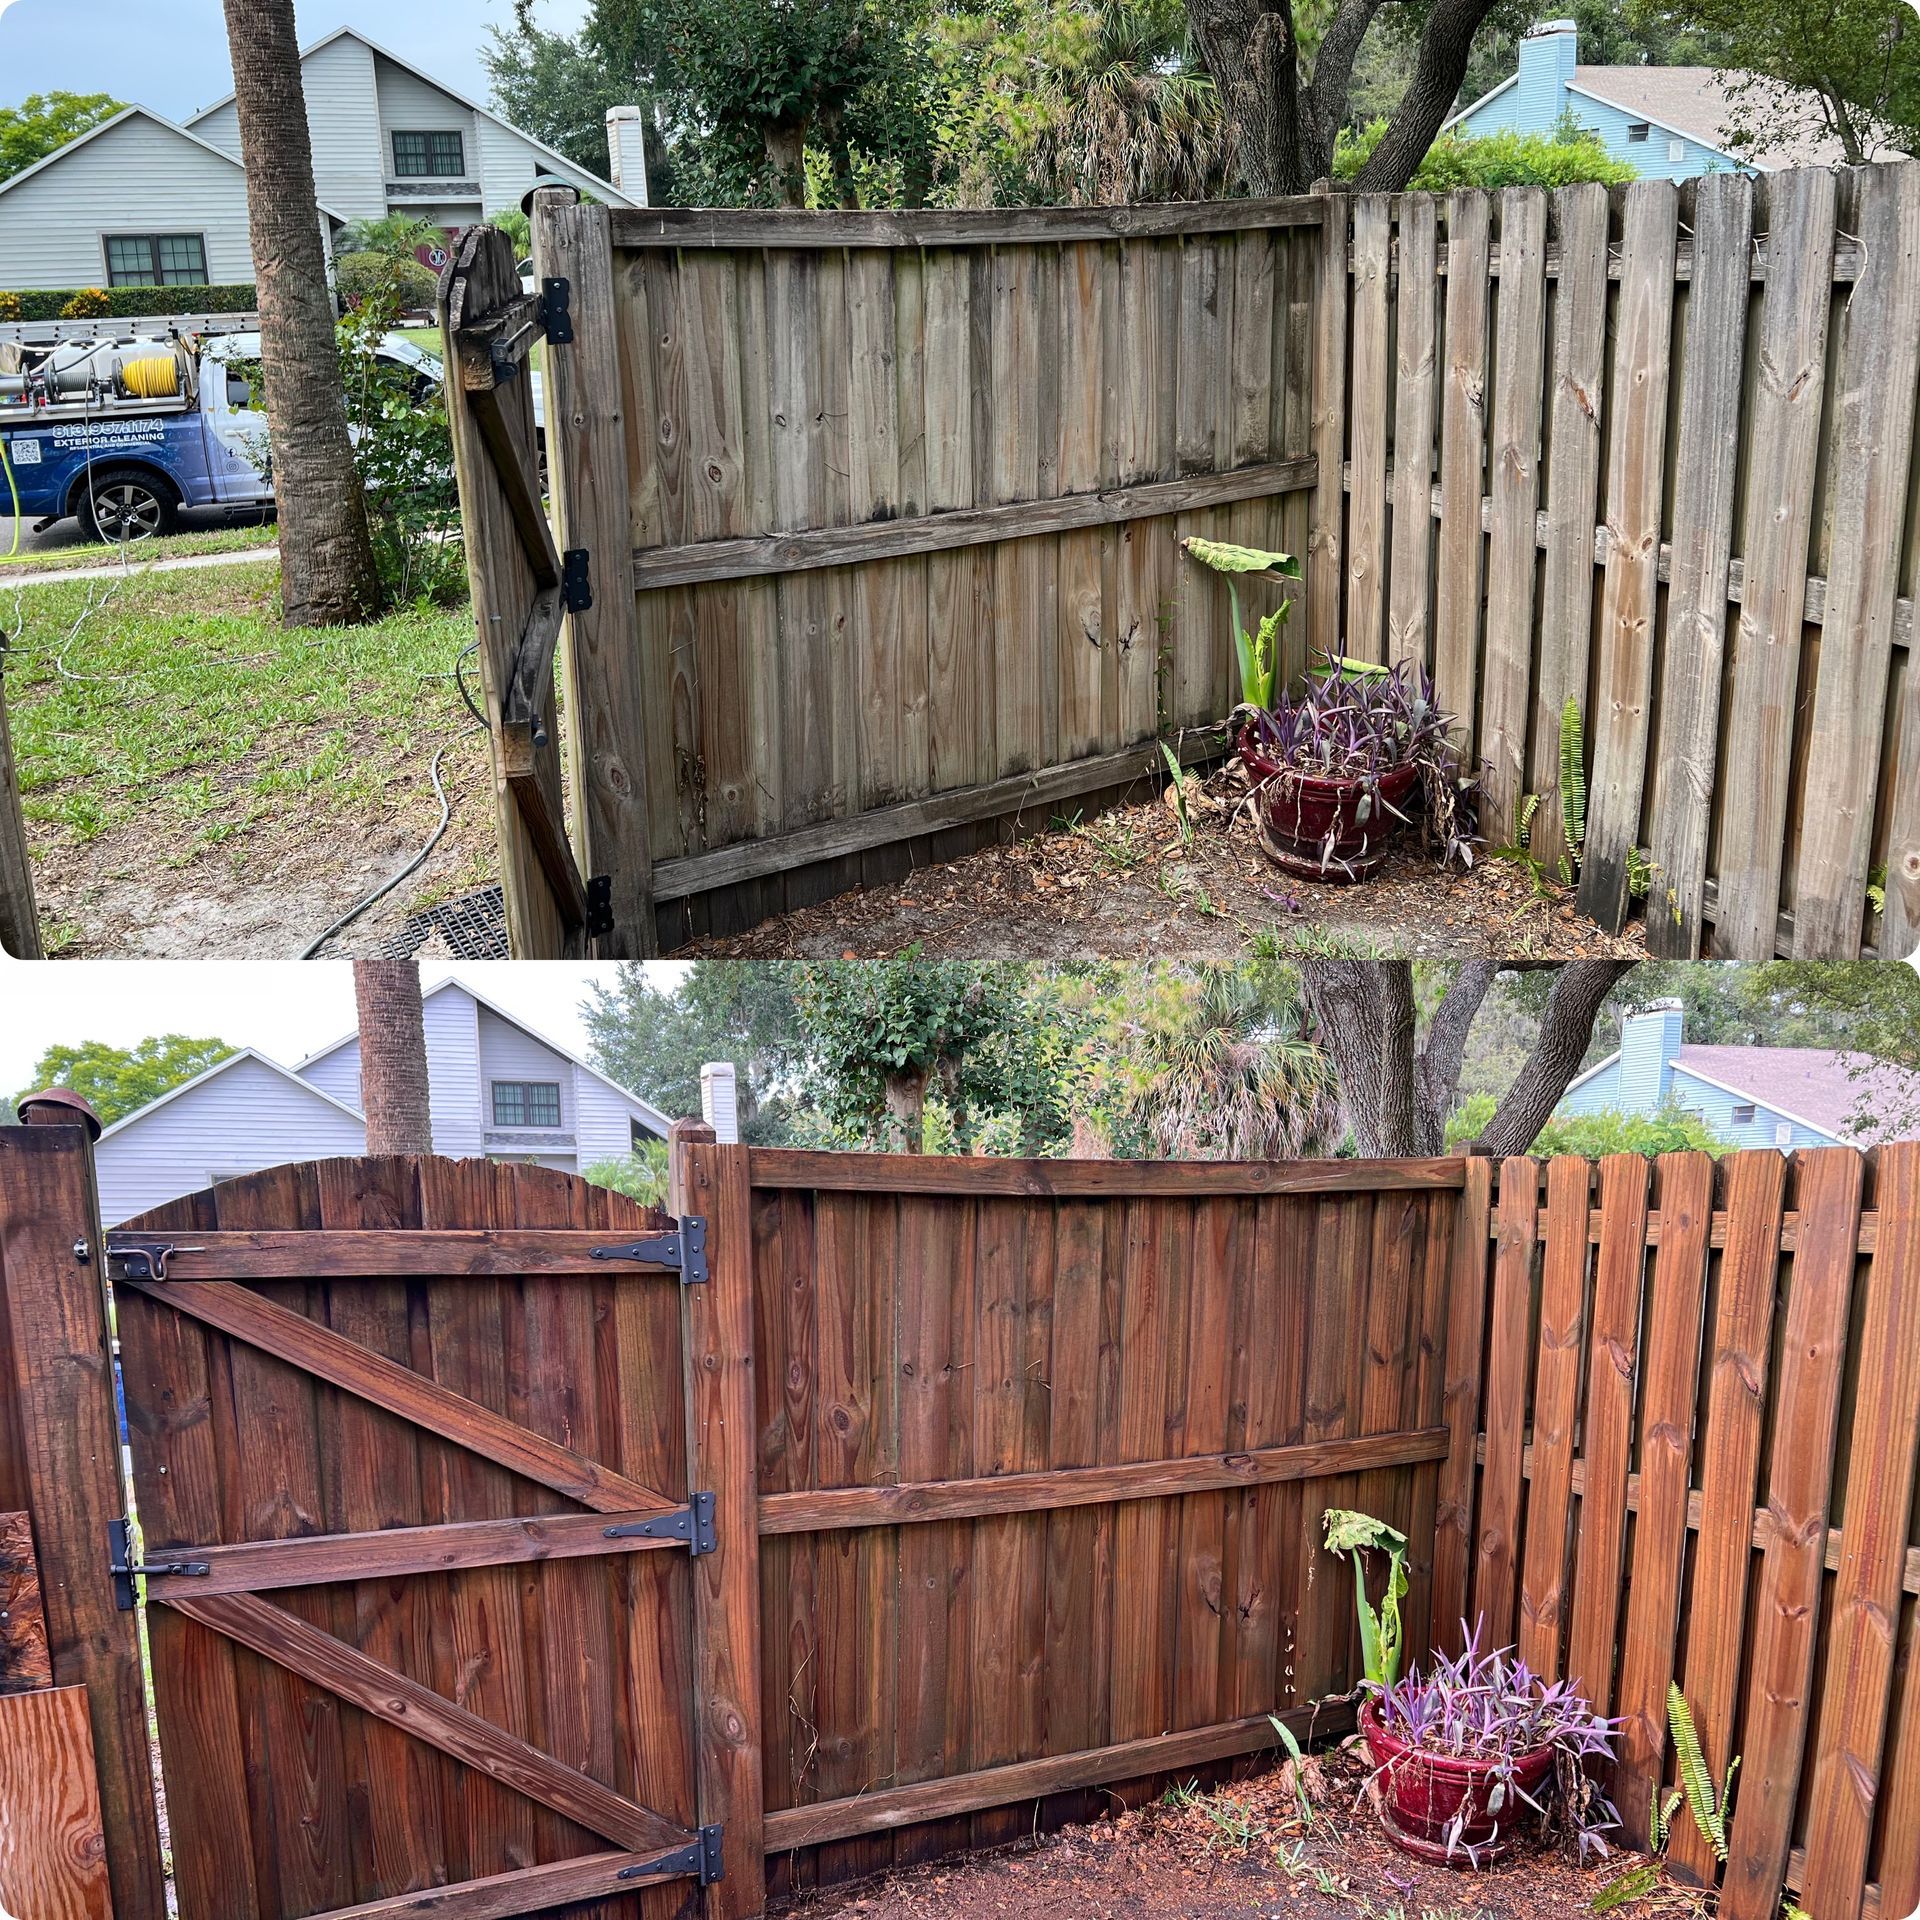 A before and after photo of a wooden fence and gate.